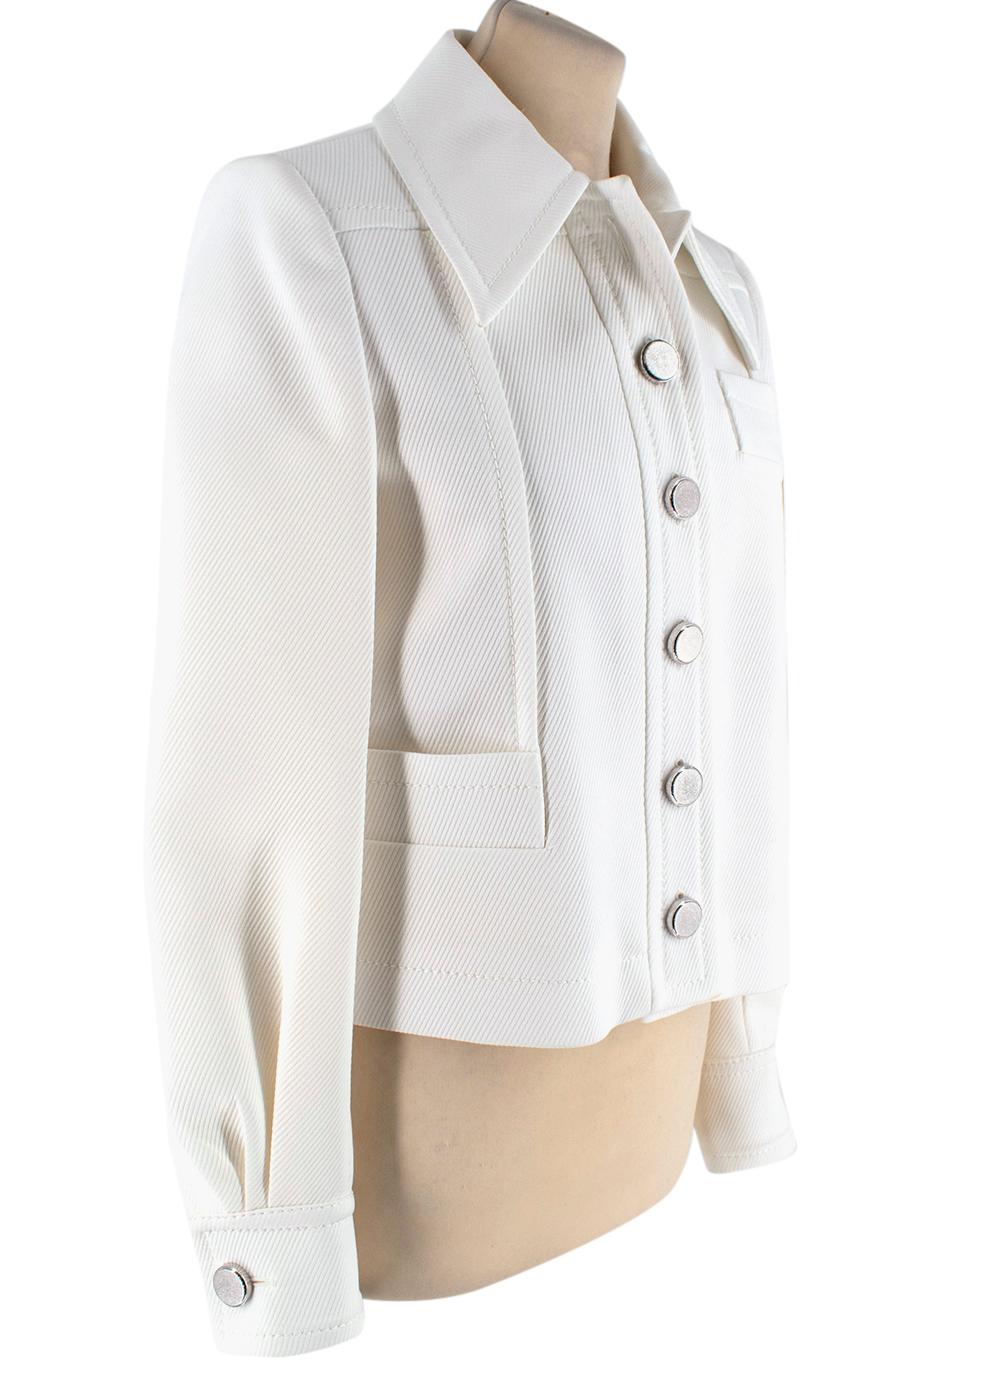 Miu Miu Ivory Jacket with Silver Buttons

-Minimal classic design  
-Luxurious metal buttons with a striped texture 
-Amazing soft fabric with a stripes texture 
-3 funcional outer pockets 
-buttoned cuffs with pleats 
-Top stitching details